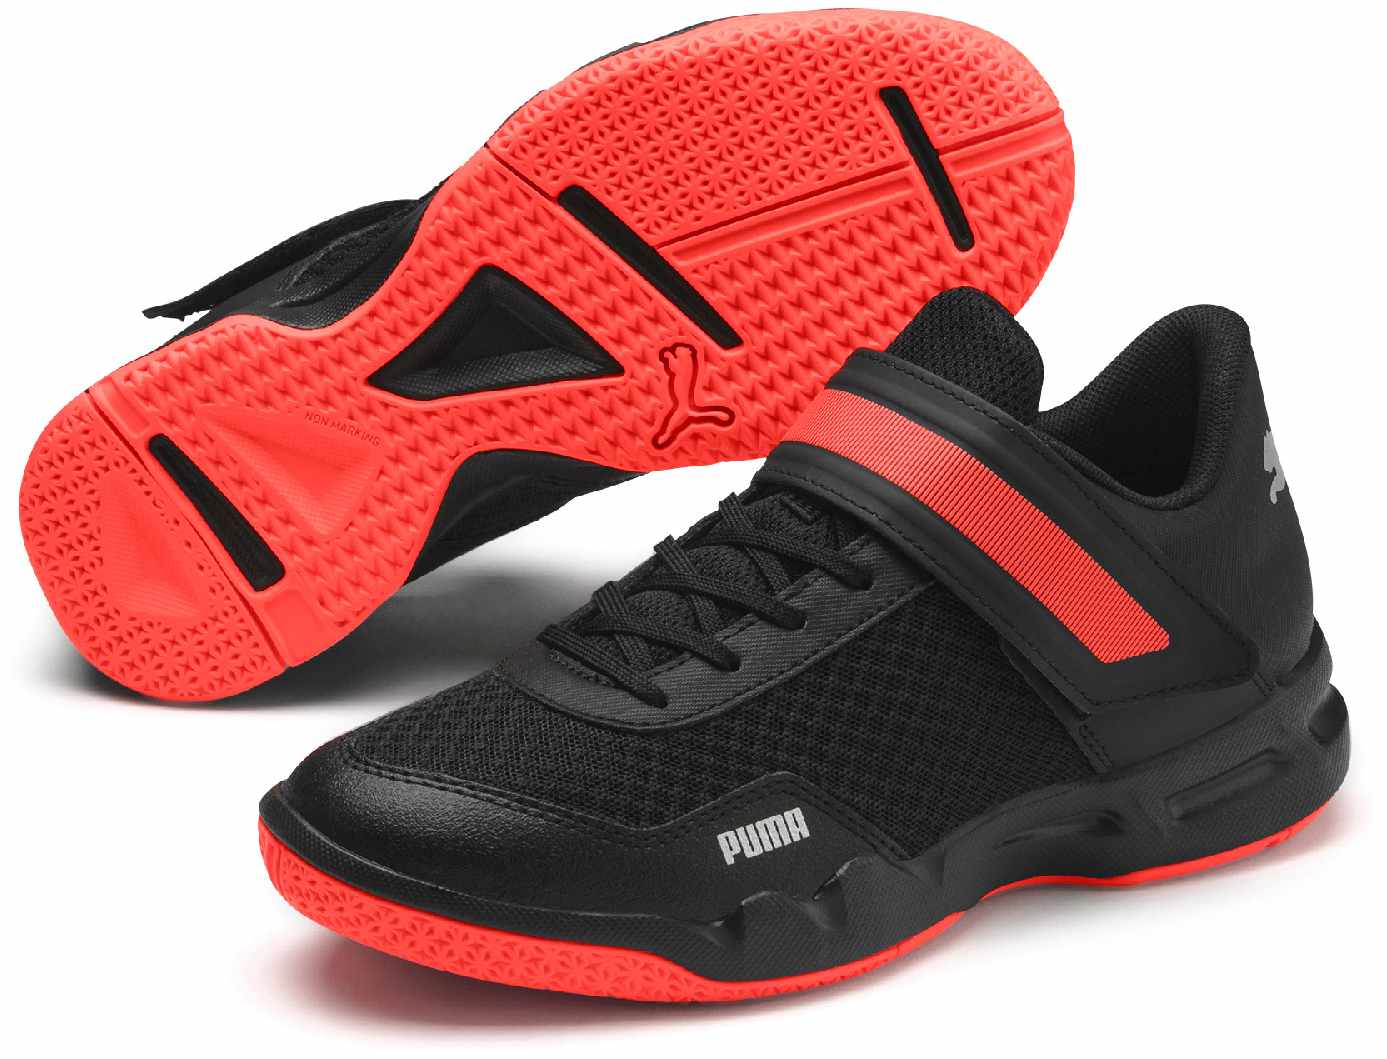 Kids' volleyball shoes